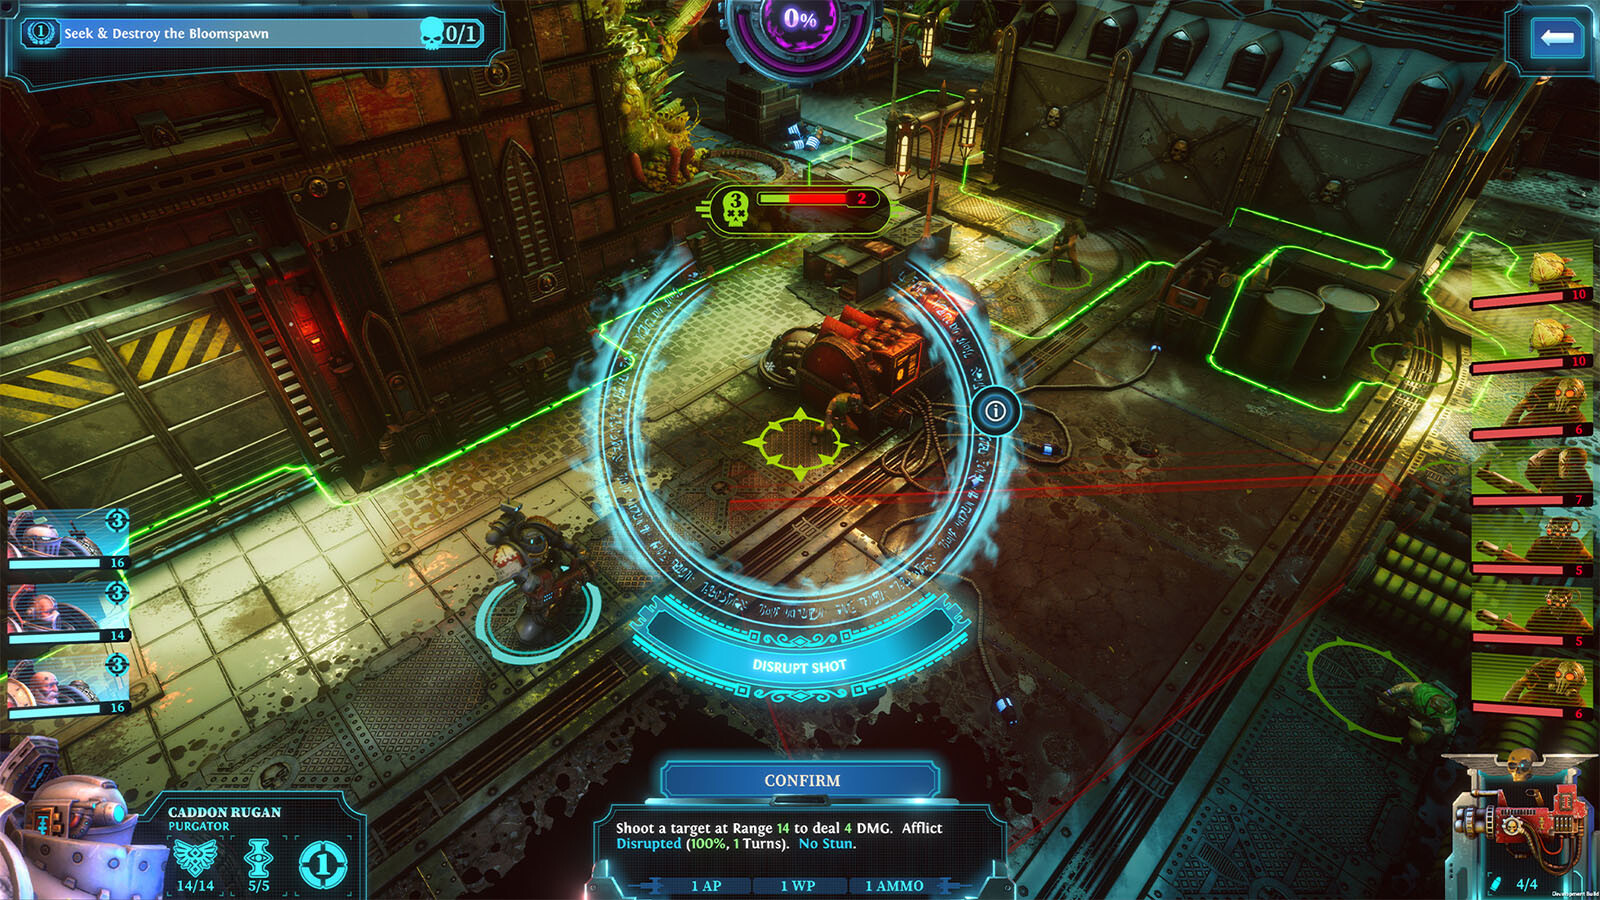 Warhammer 40,000: Chaos Gate - Daemonhunters Steam Key for PC - Buy now